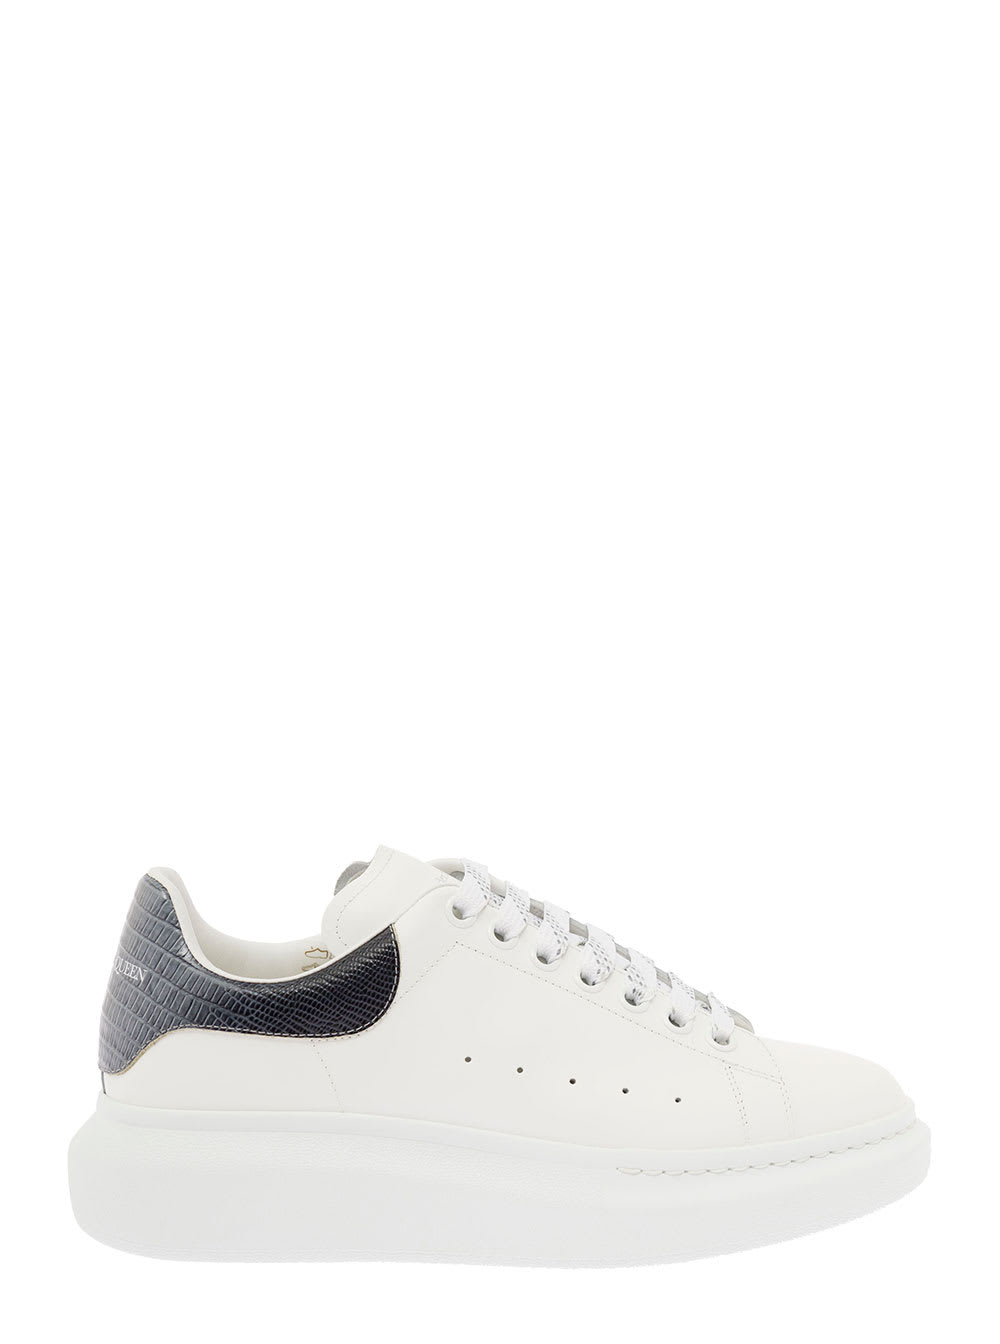 Oversize White Leather Sneakers With Crocodile Printed Heel Tab Alexander Mcqueen Man